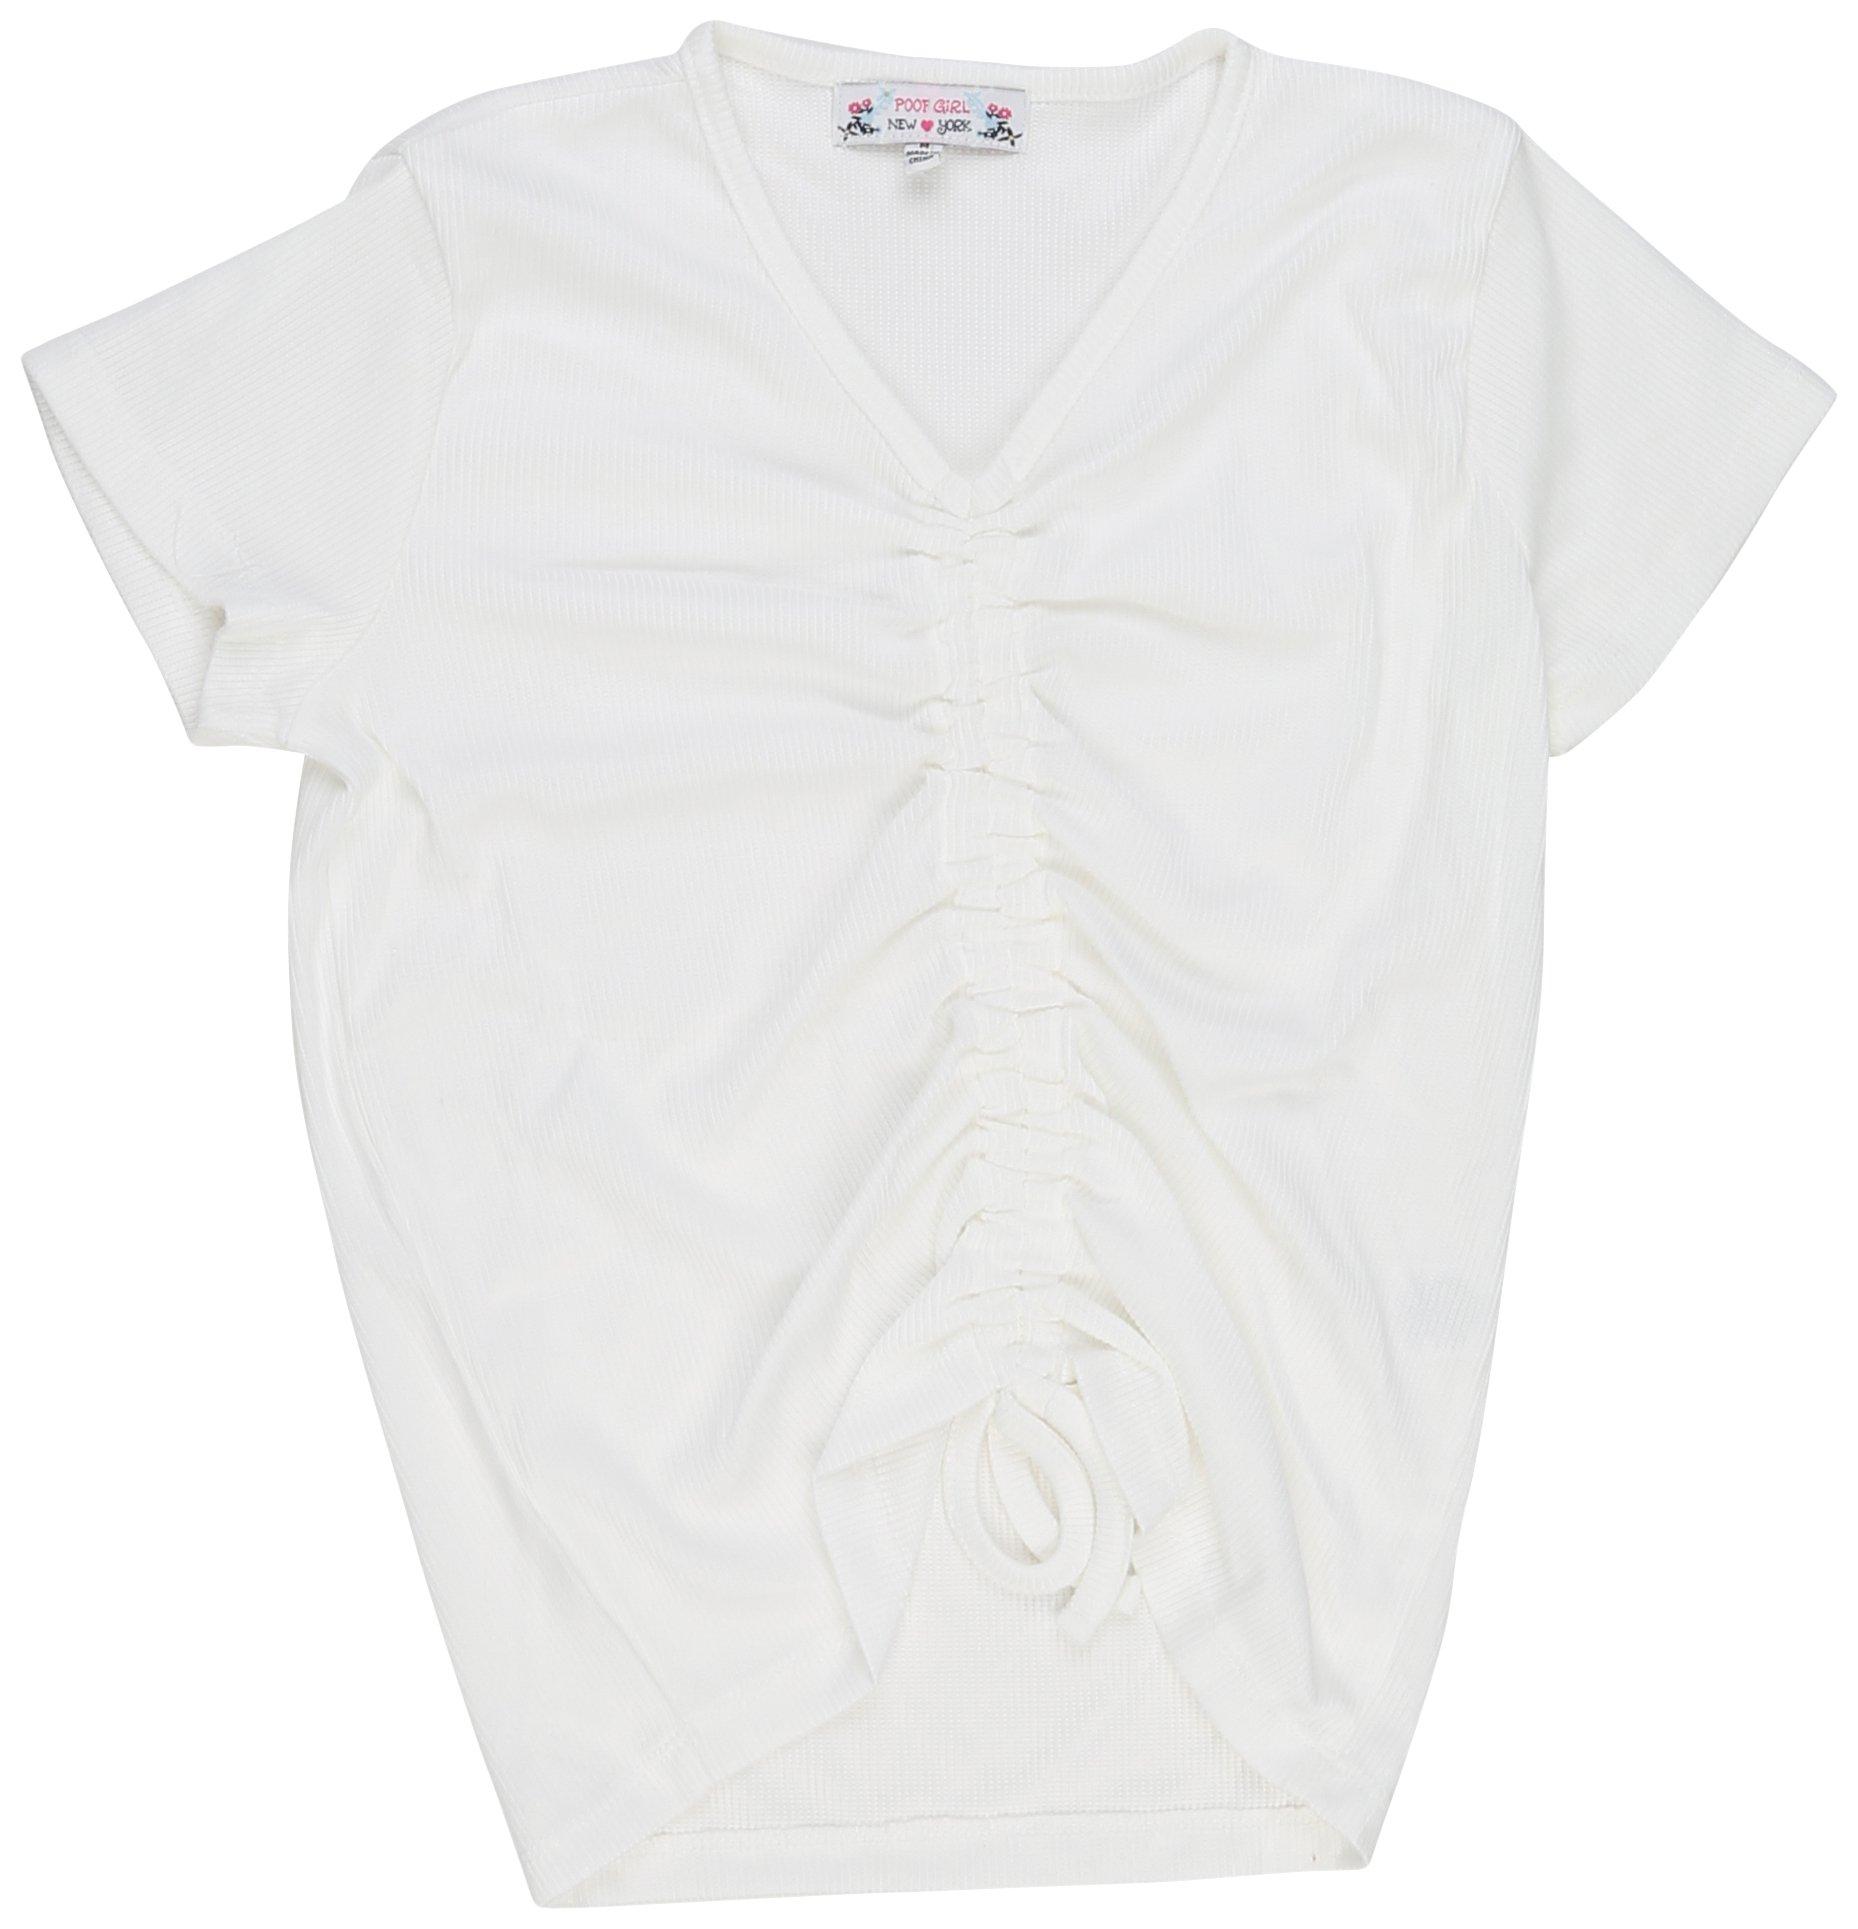 Big Girls Double Ruched Short Sleeve Top